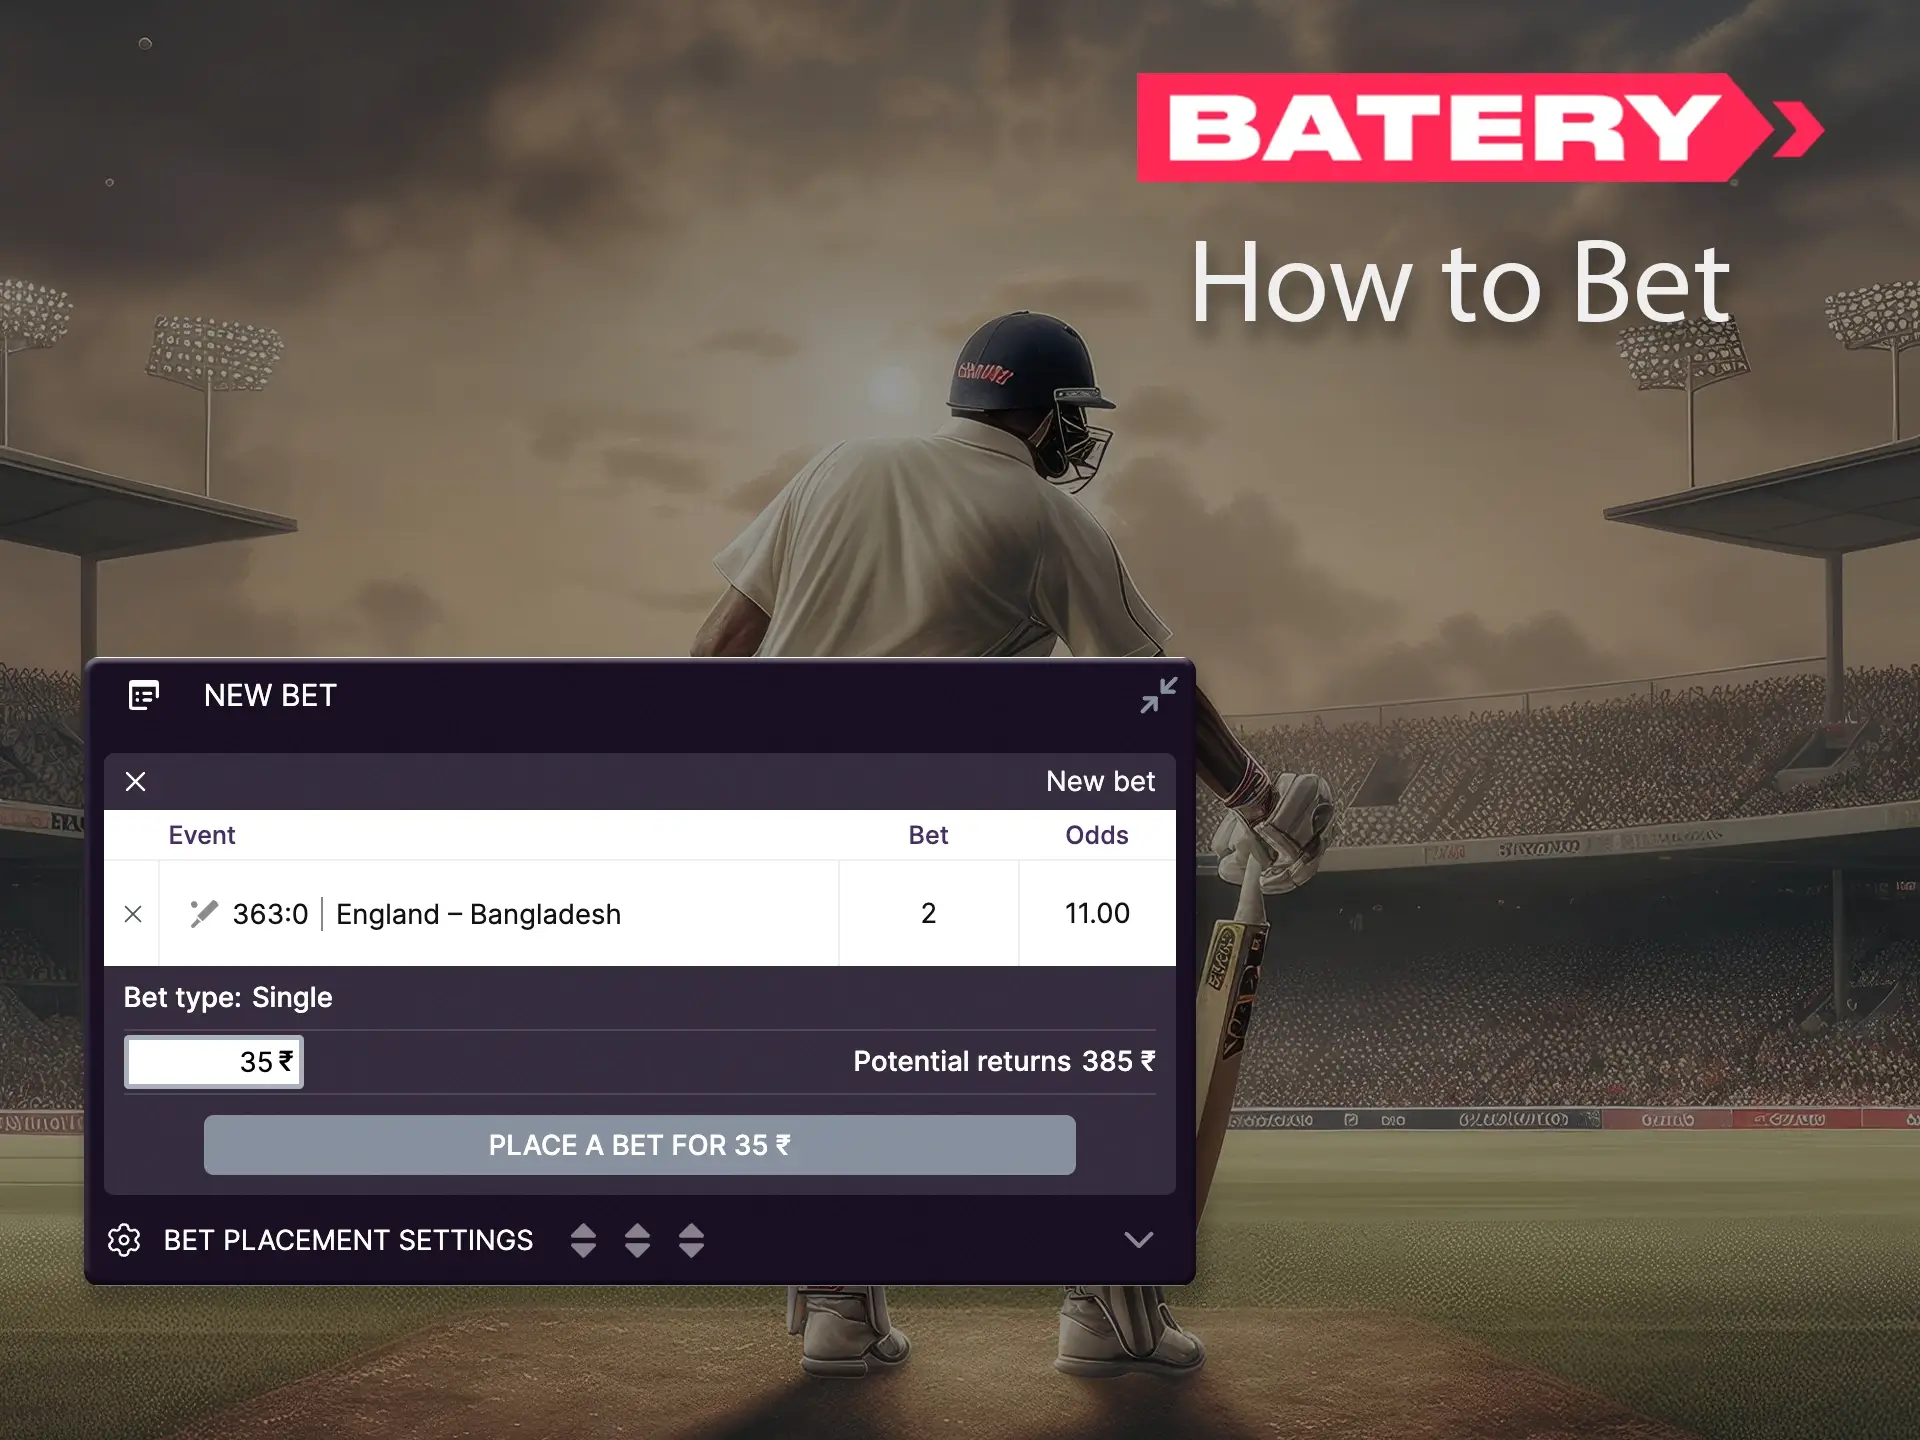 Carefully study the instructions on how to make the bet you want in the match.